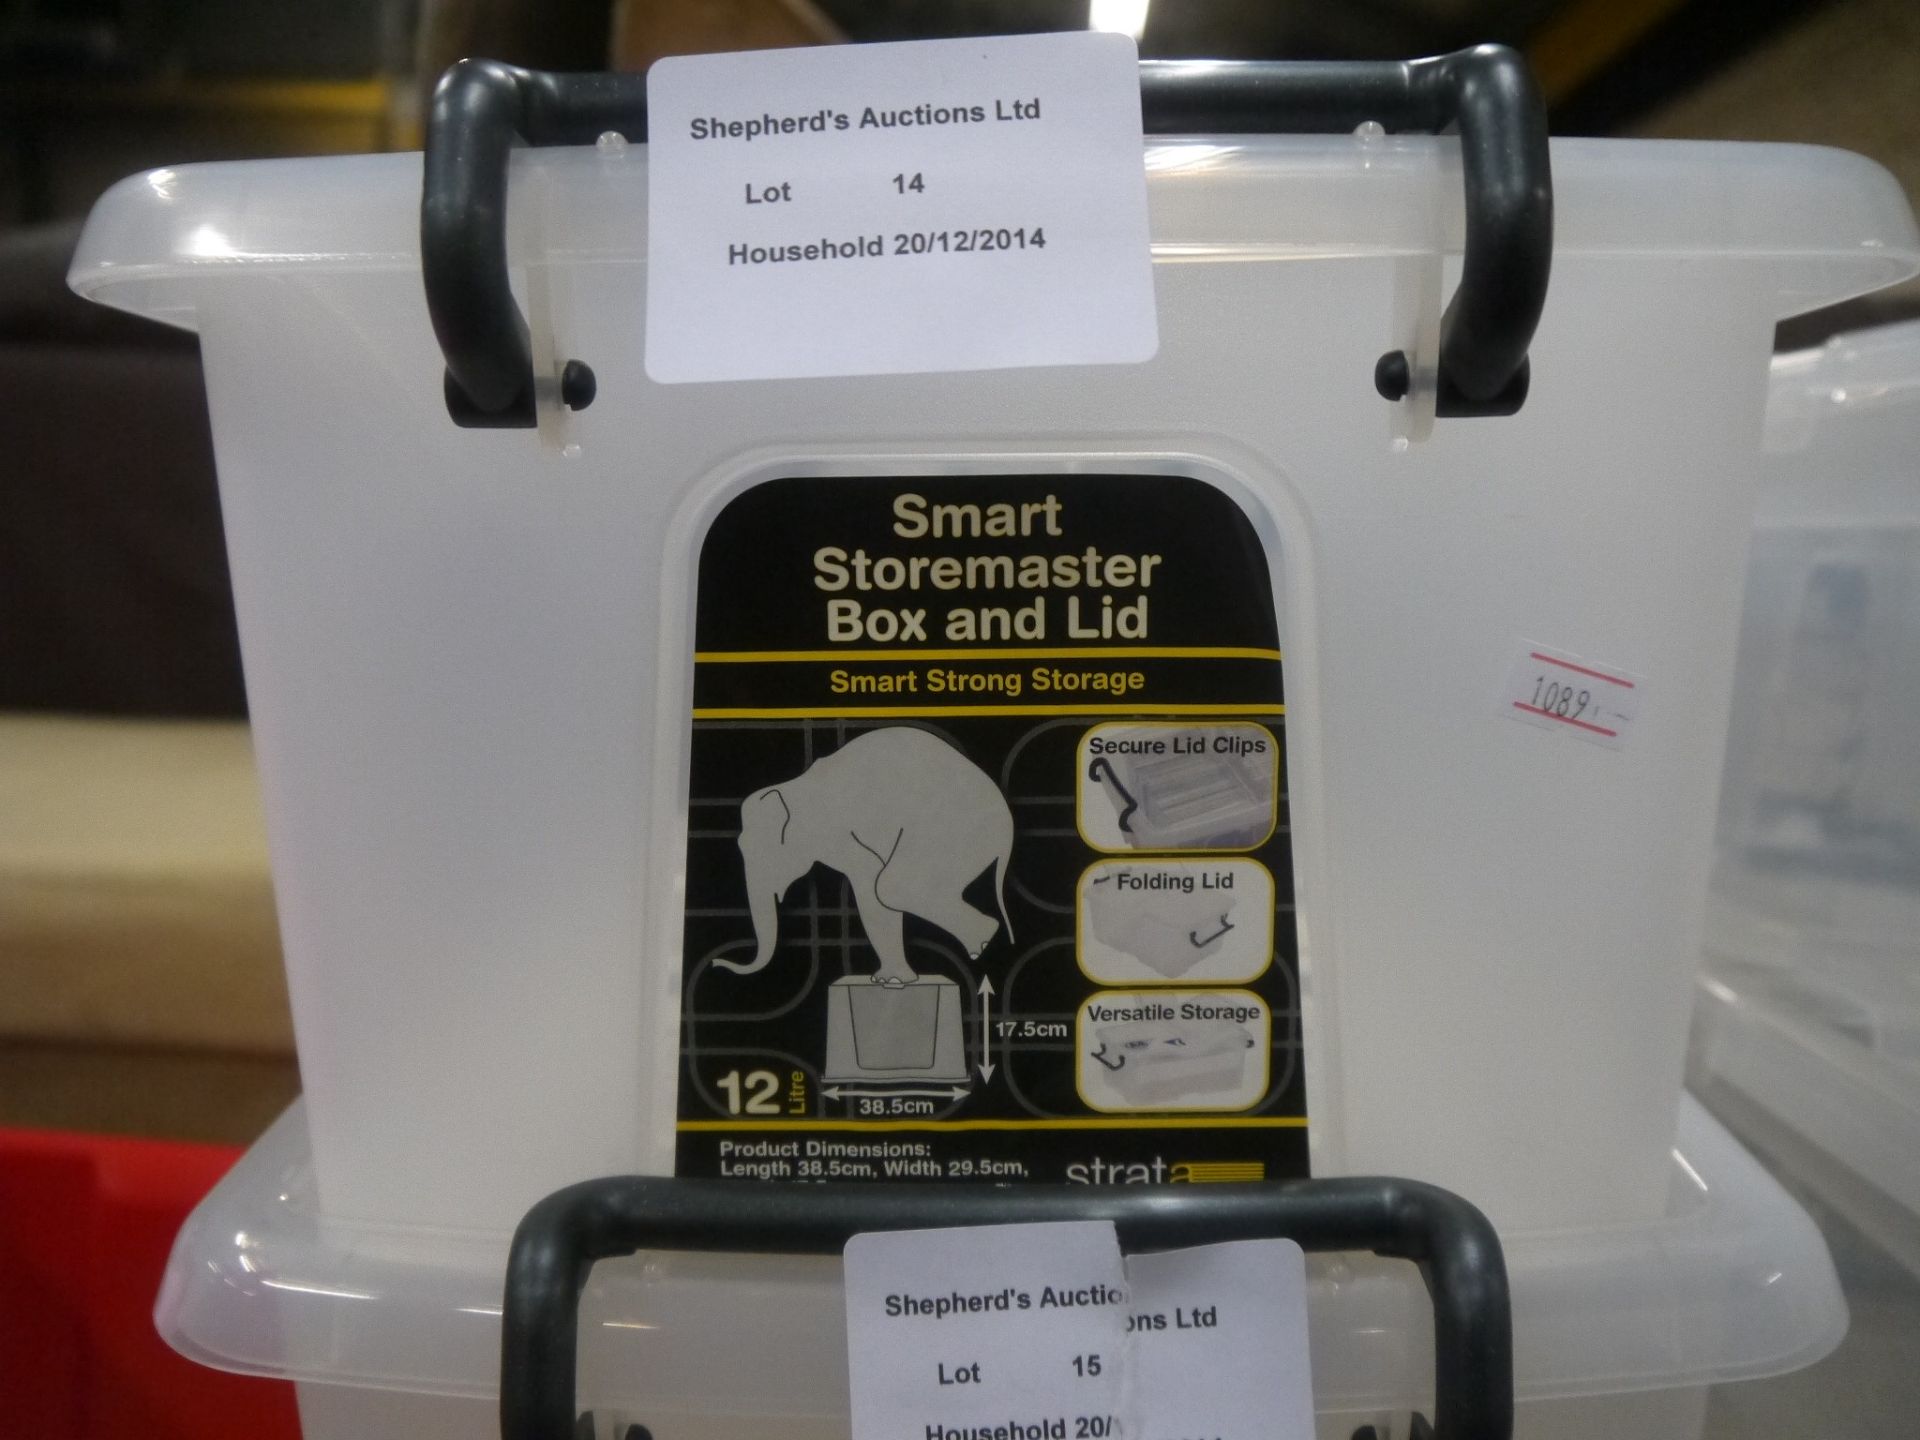 12ltr Smart Storemaster box and Lid, new